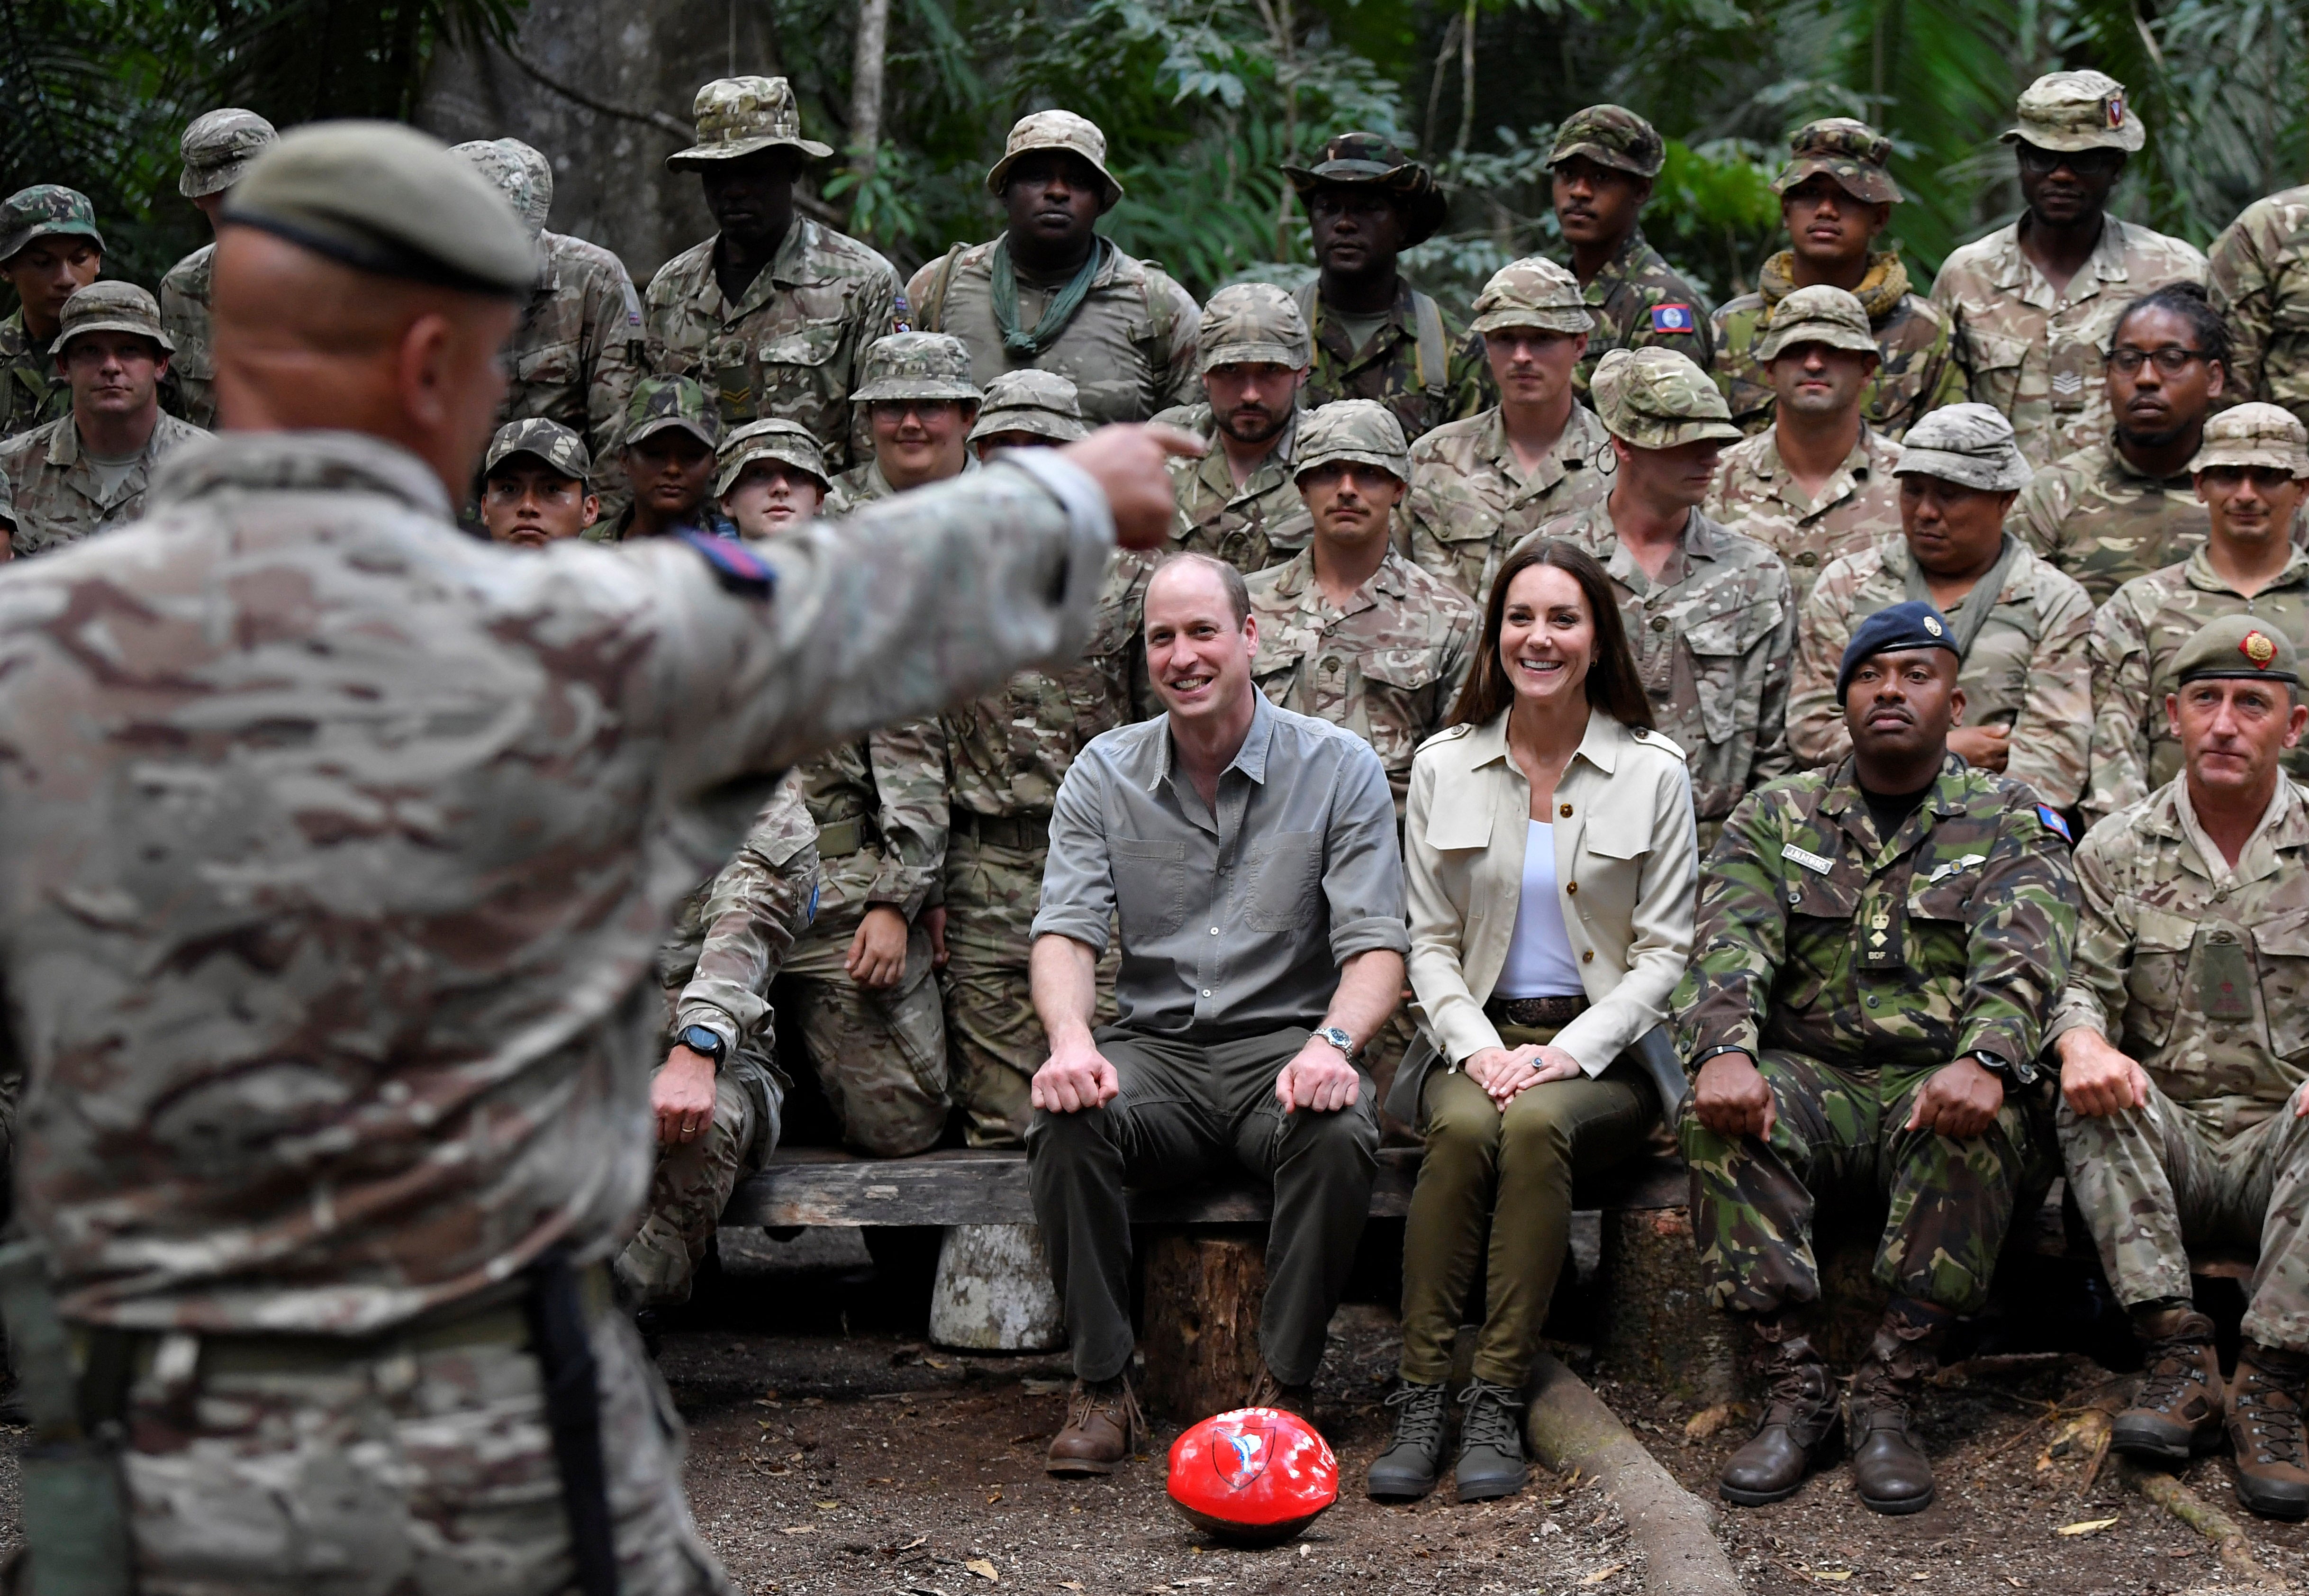 Prince William, Duke of Cambridge and Catherine, Duchess of Cambridge sit for a photo with military personnel from Britain and Belize during a visit to the British Army Training Support Unit (BATSUB) jungle training facility on the third day of a Platinum Jubilee Royal Tour to the Caribbean on March 21, 2022